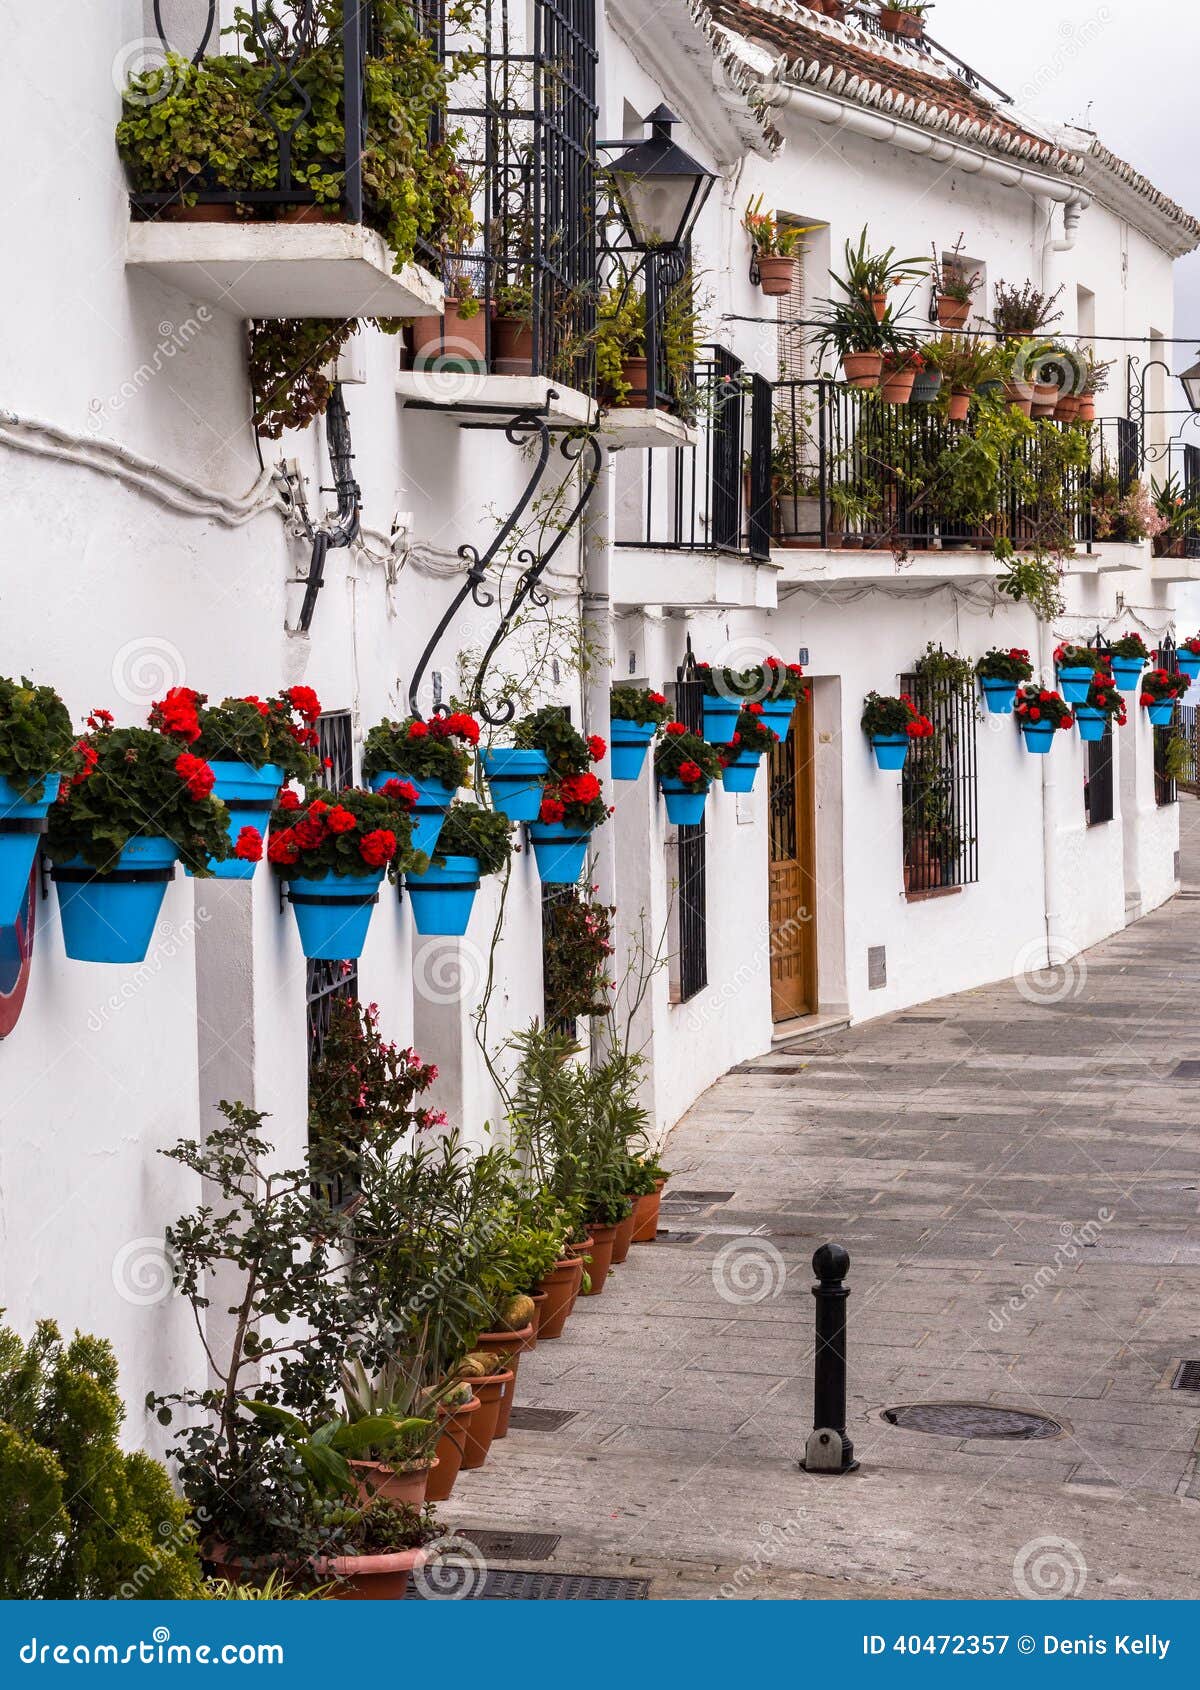 terraced white houses in andalucia village, spain